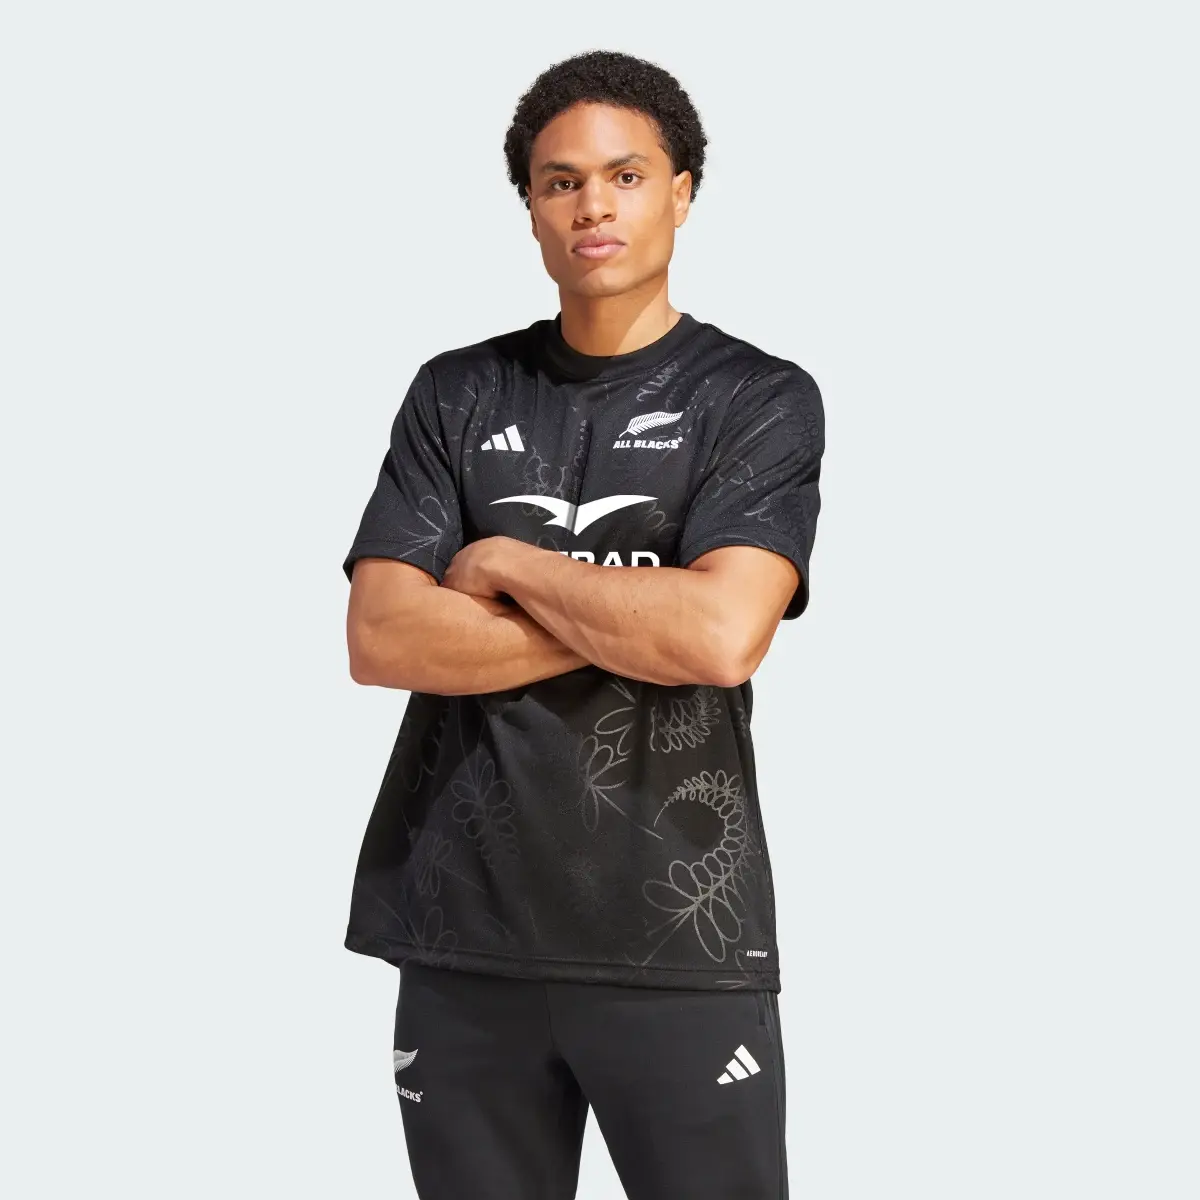 Adidas T-shirt de rugby supporters All Blacks. 2